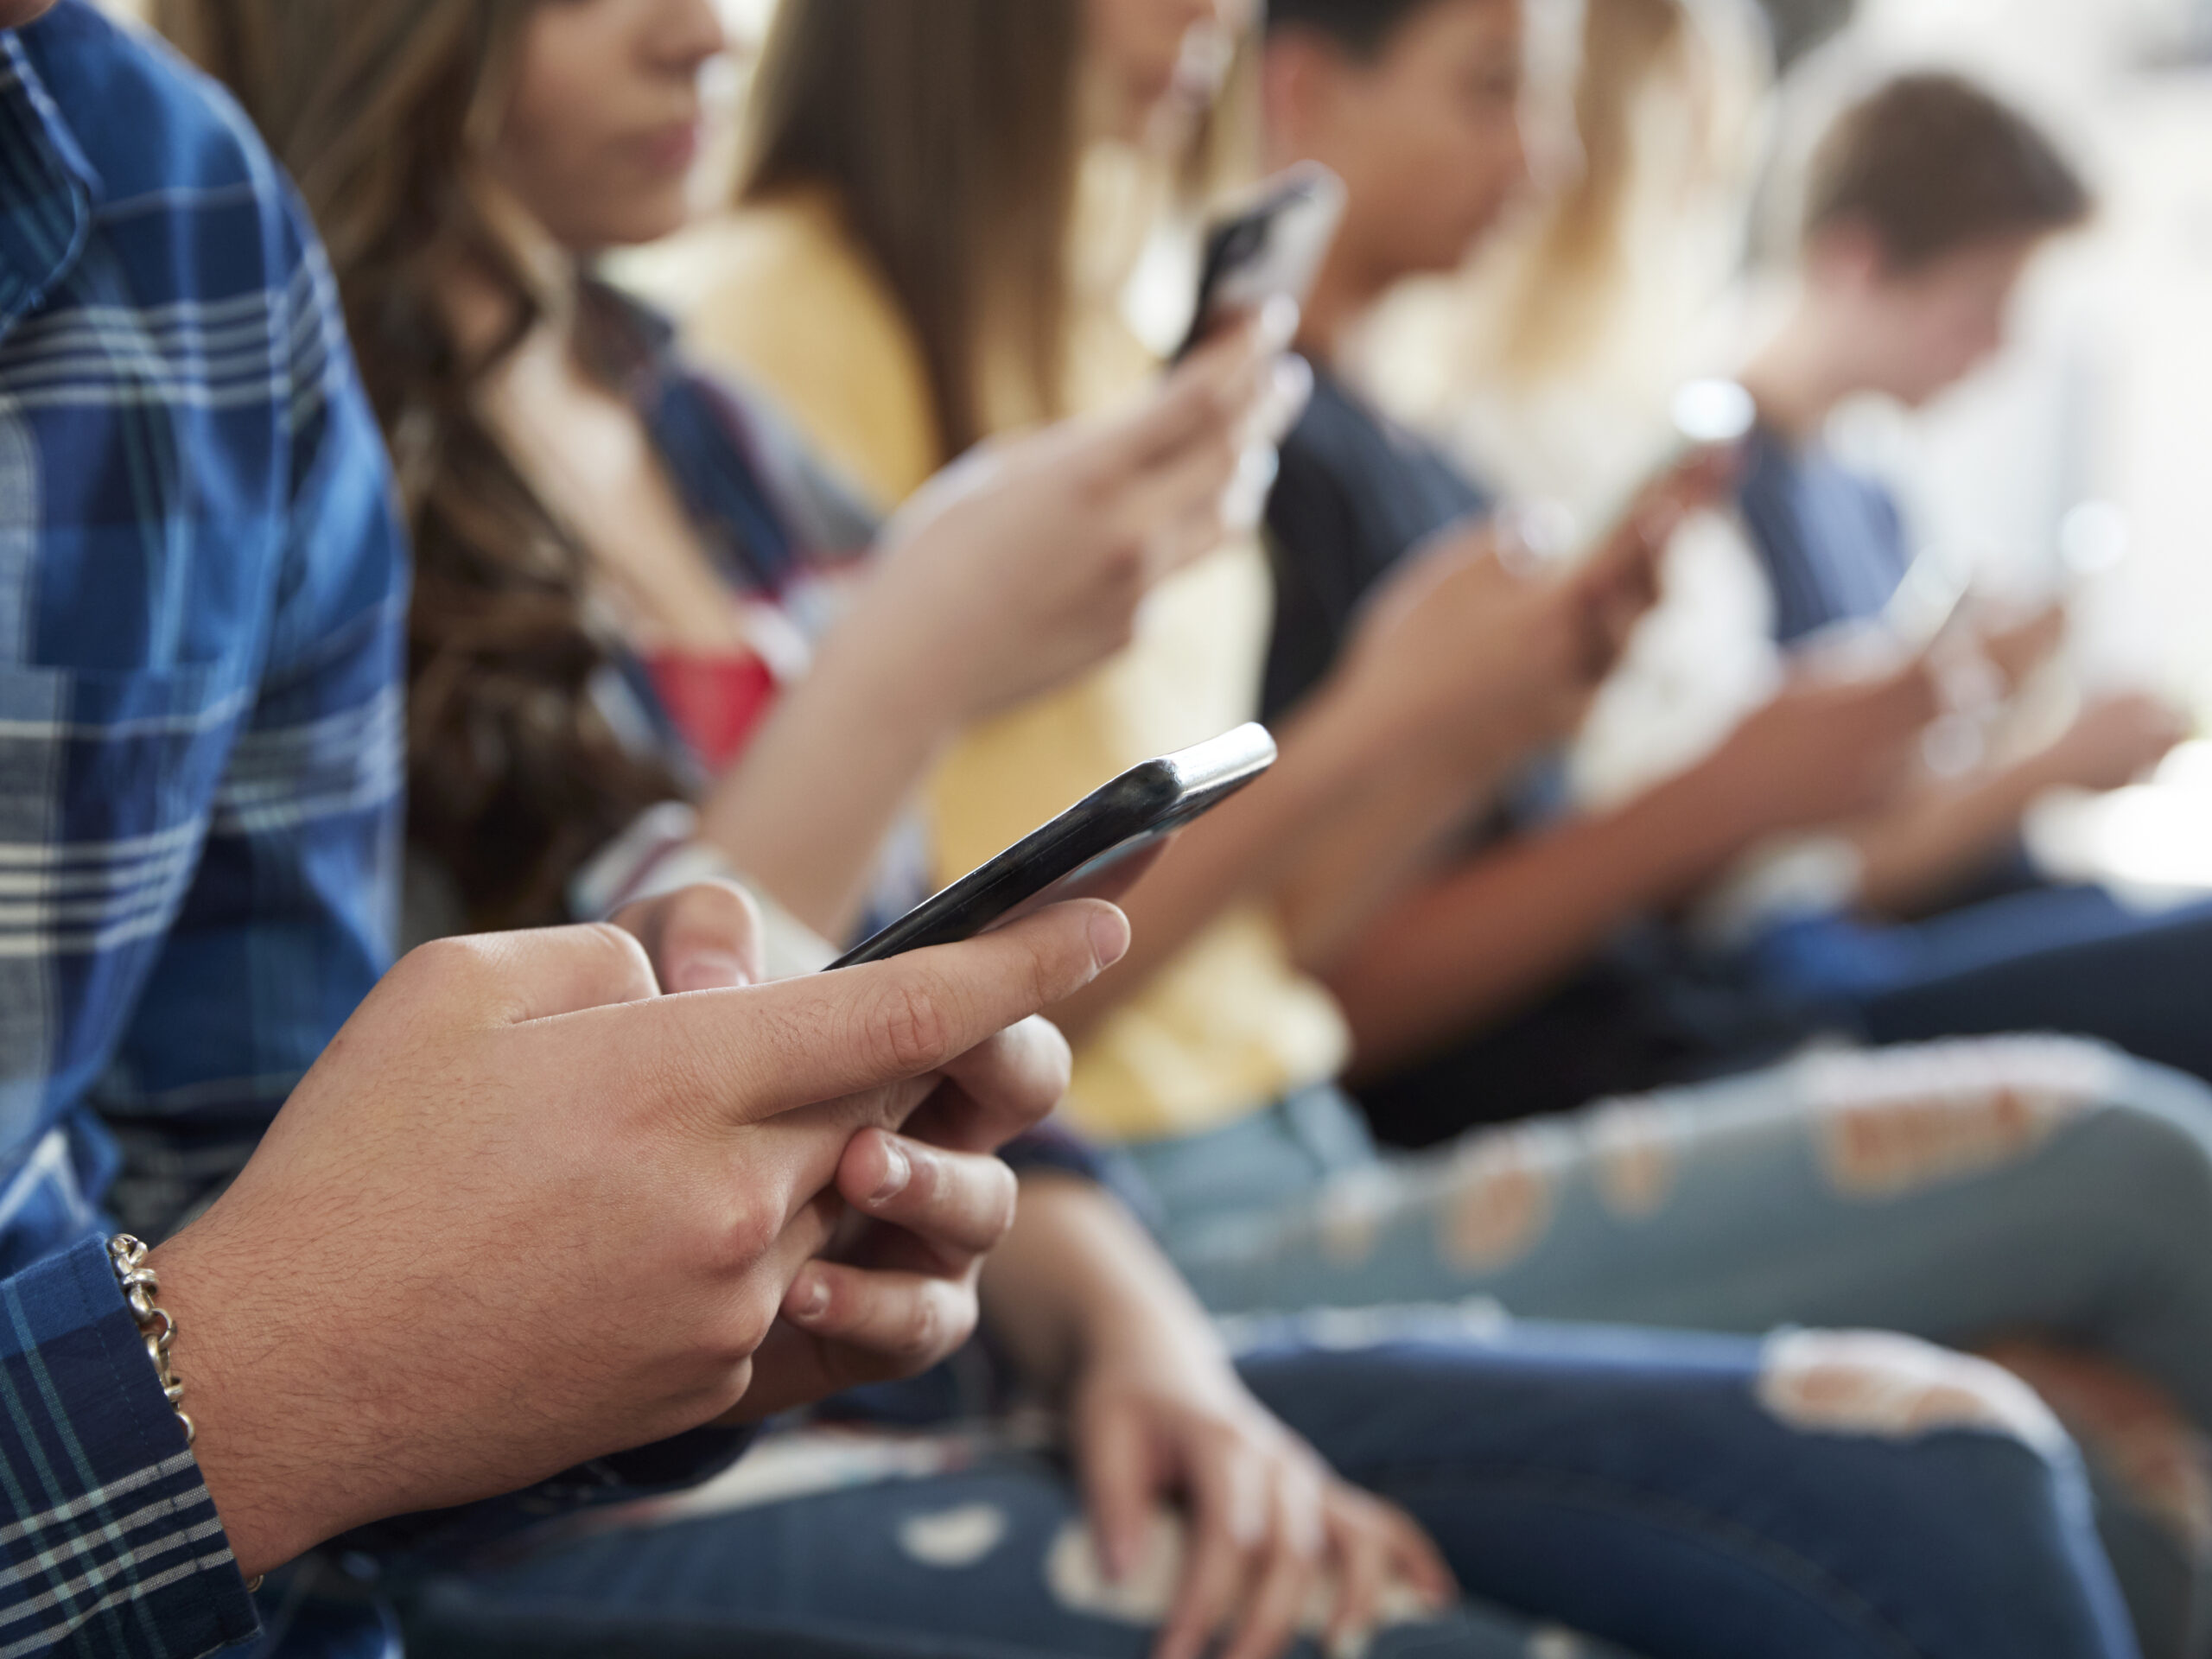 Around the country, state legislatures and school districts are looking at ways to keep cellphones from being a distraction in schools.